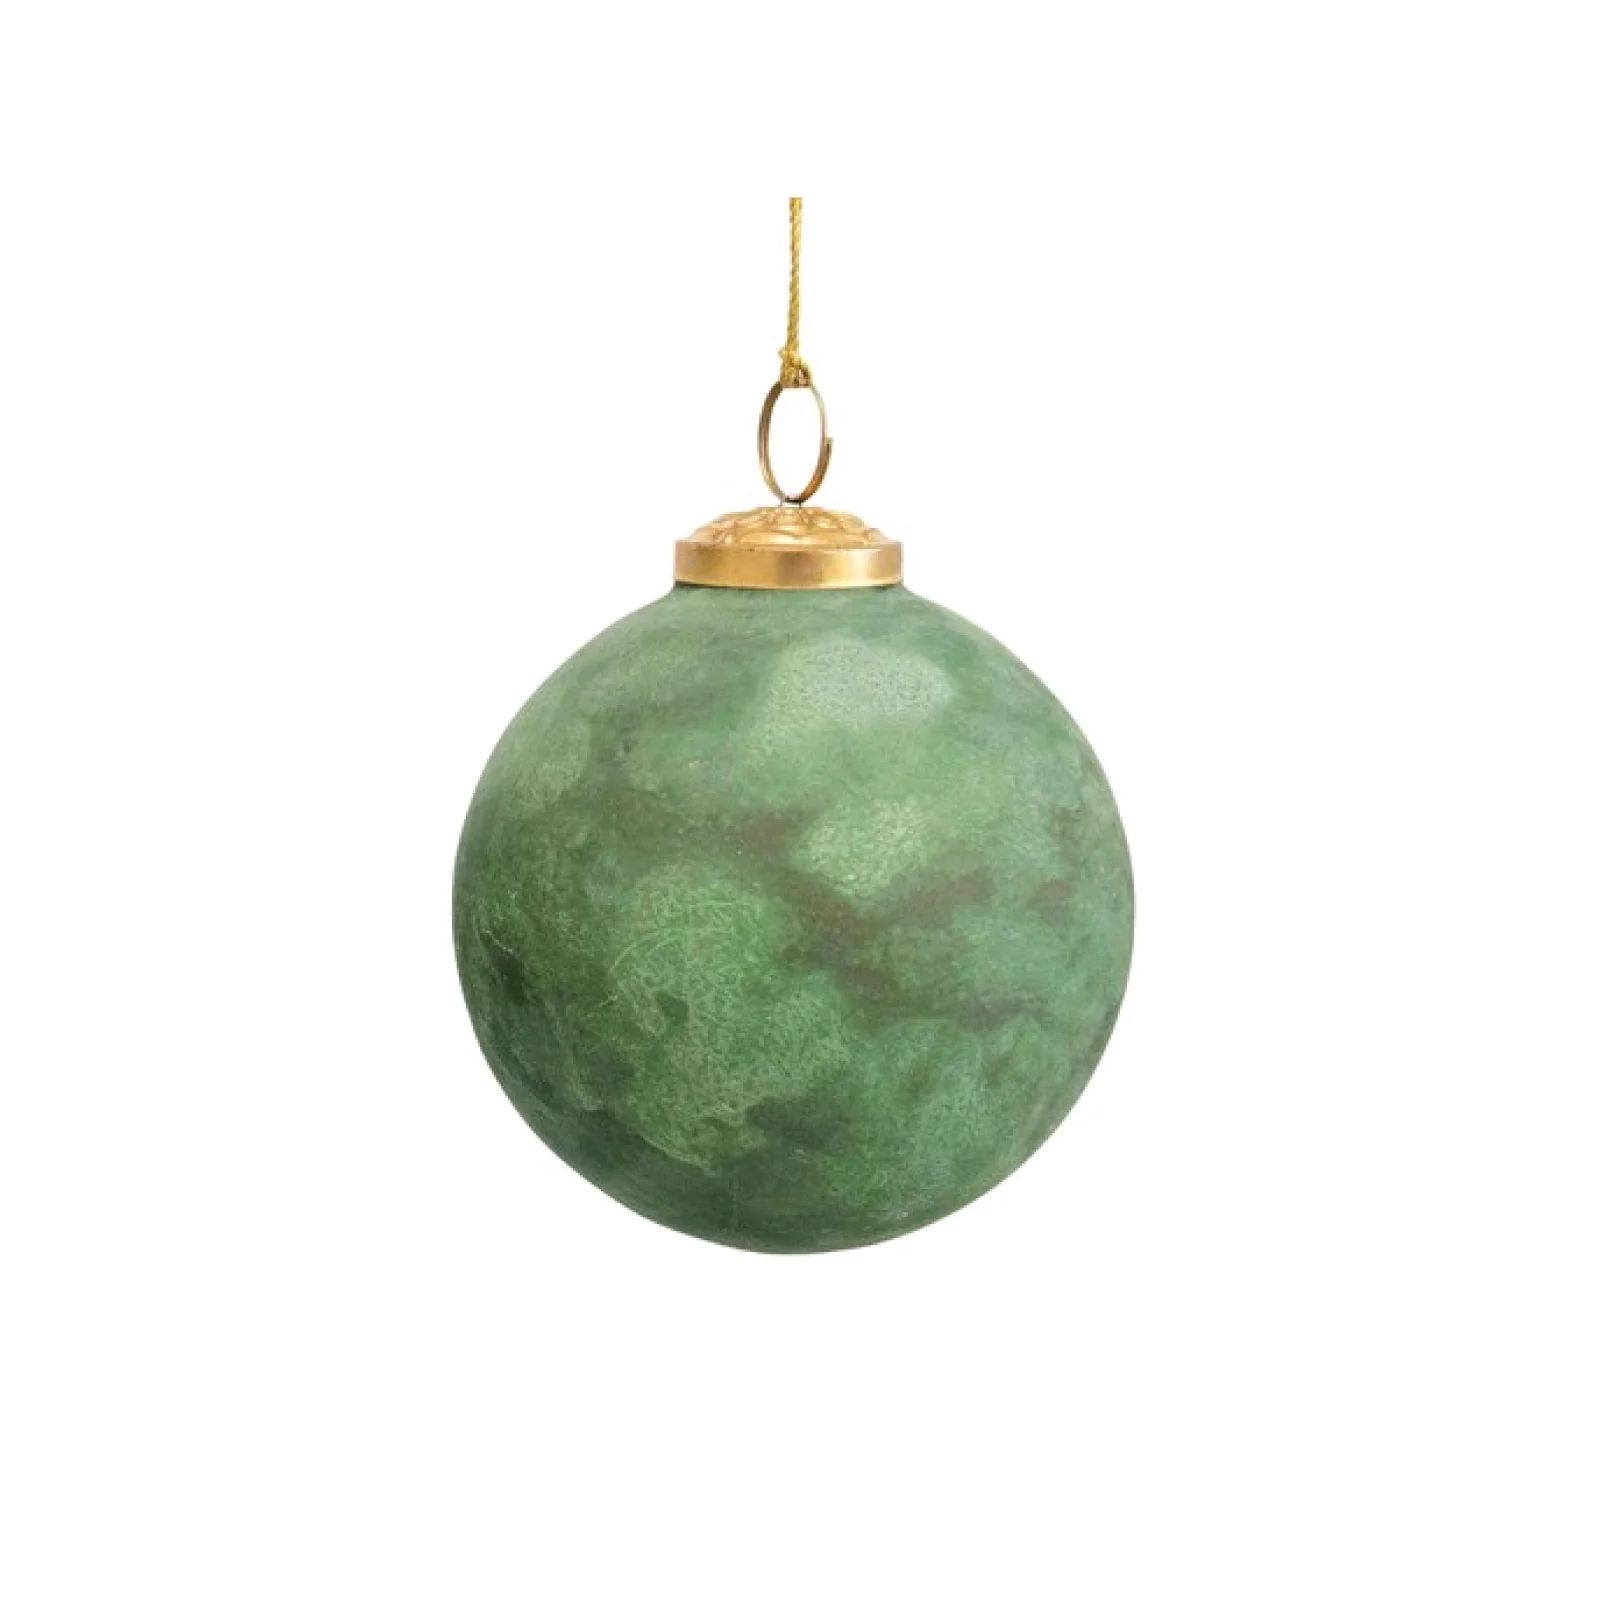 Moss Flocked Glass Ball Ornament | Brooke and Lou